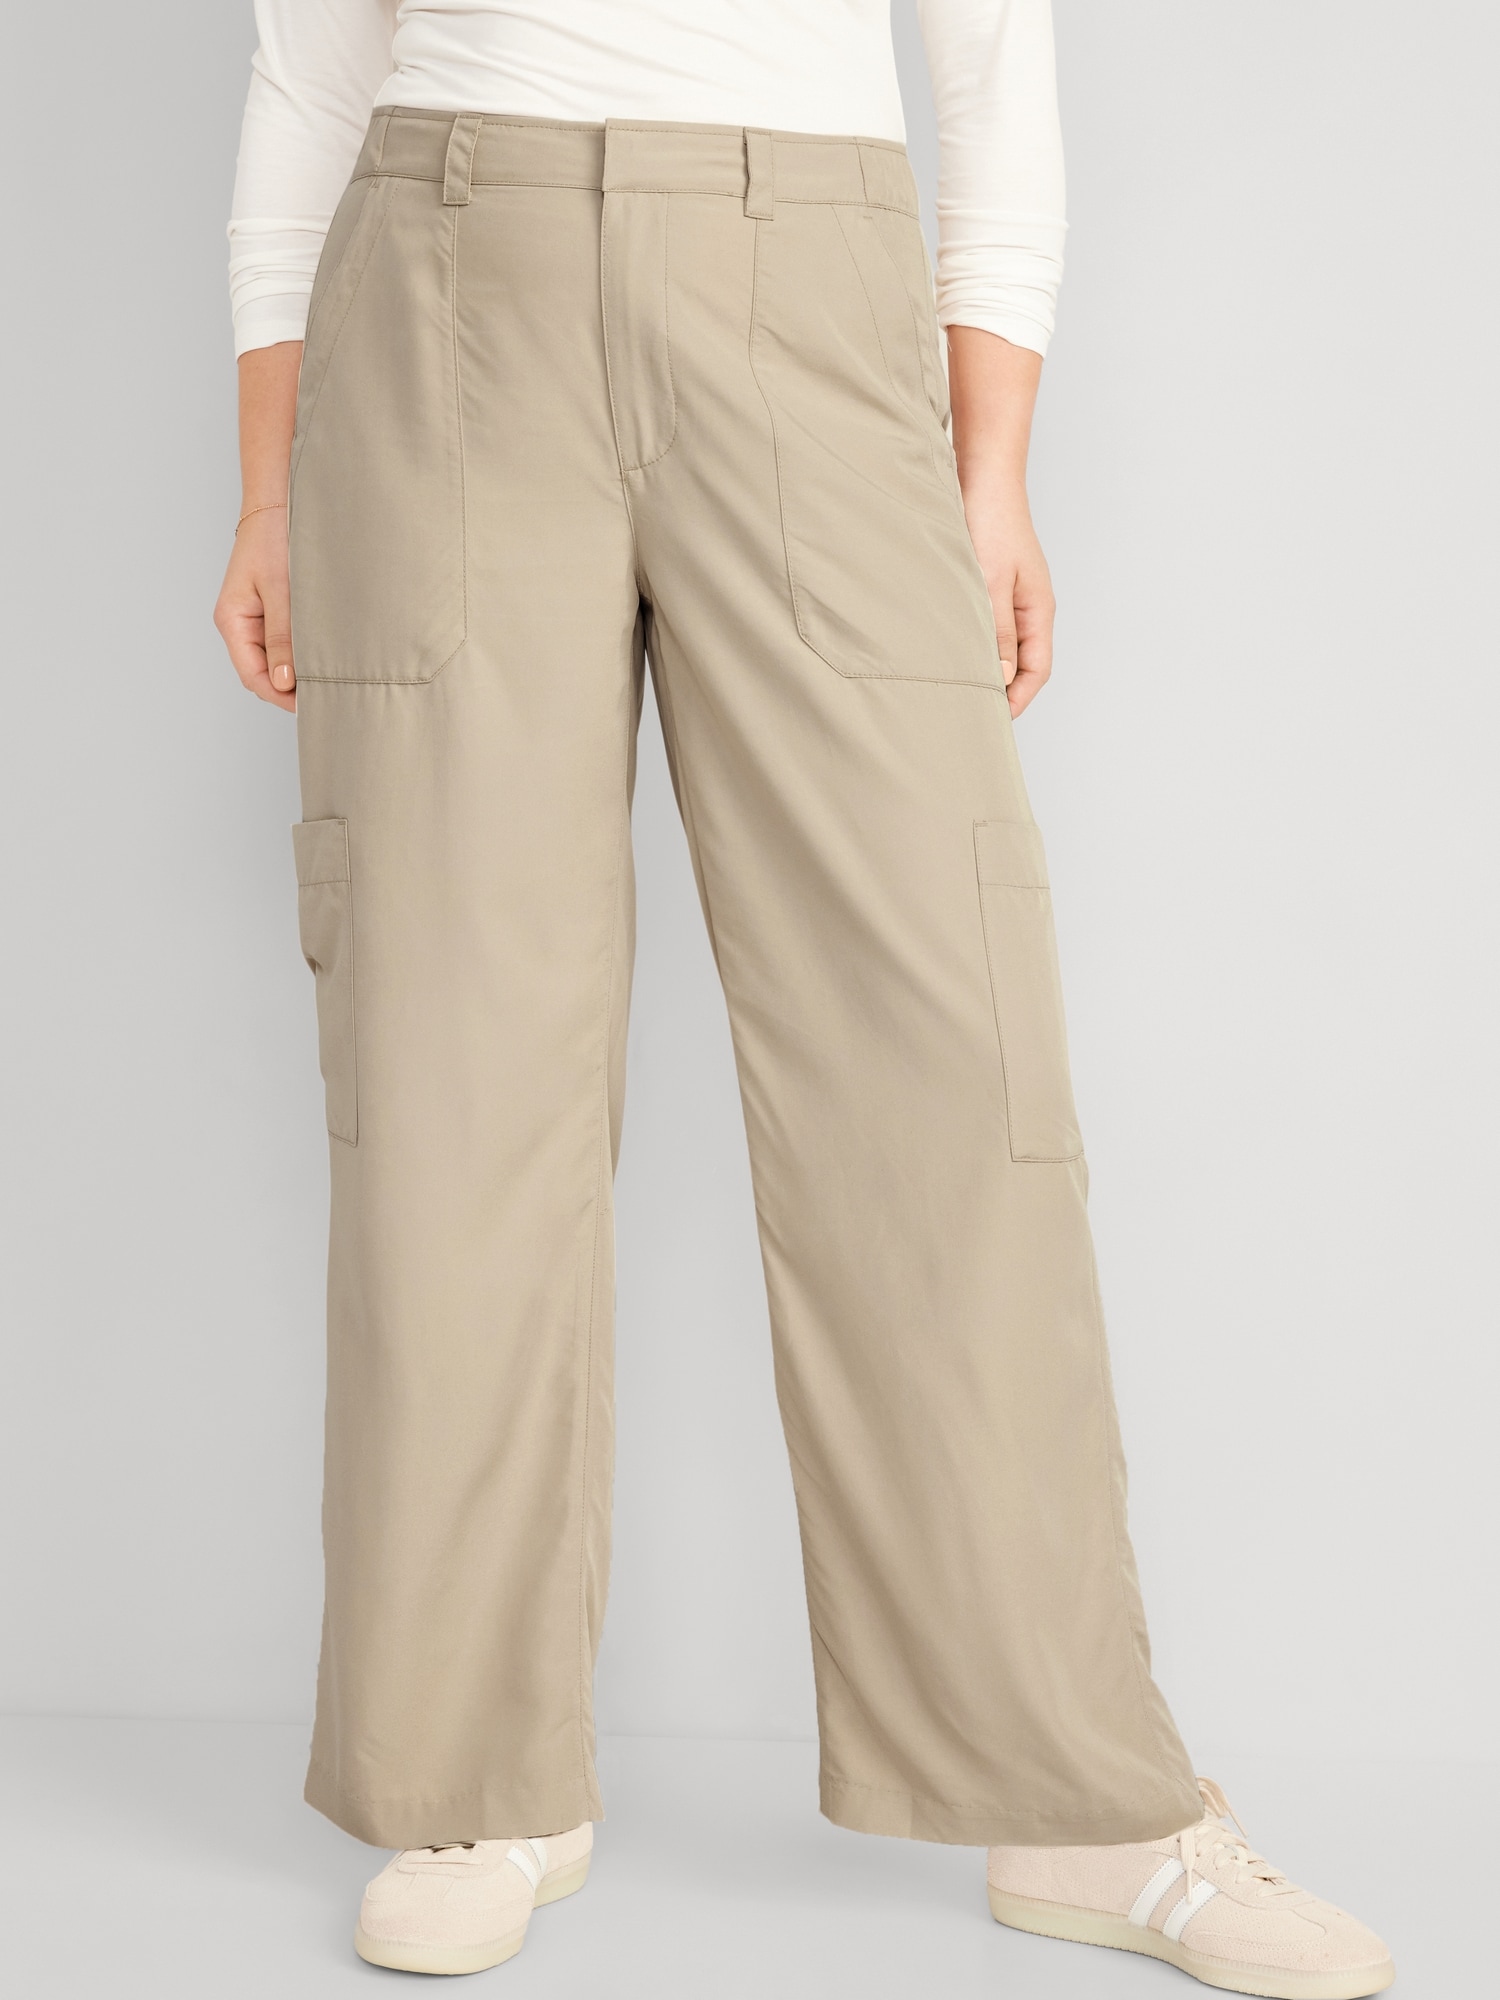 The Mid-Rise Wide-Leg Utility Chinos From Old Navy Are a Petite